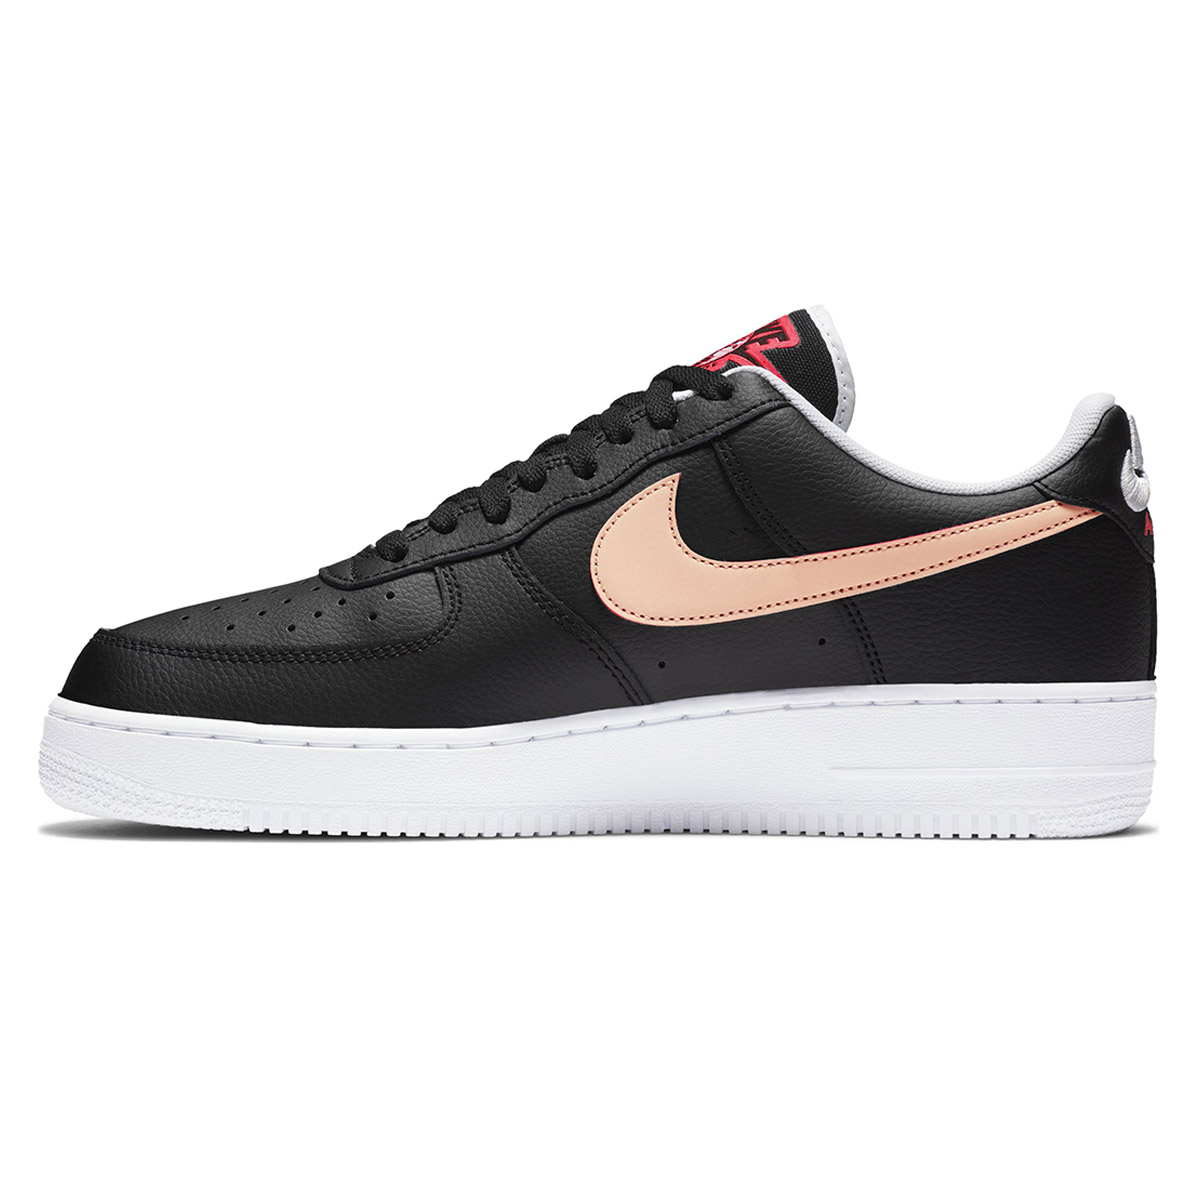 Zapatillas Nike Air Force 1 '07 Worldwide Black Crimson,  image number null